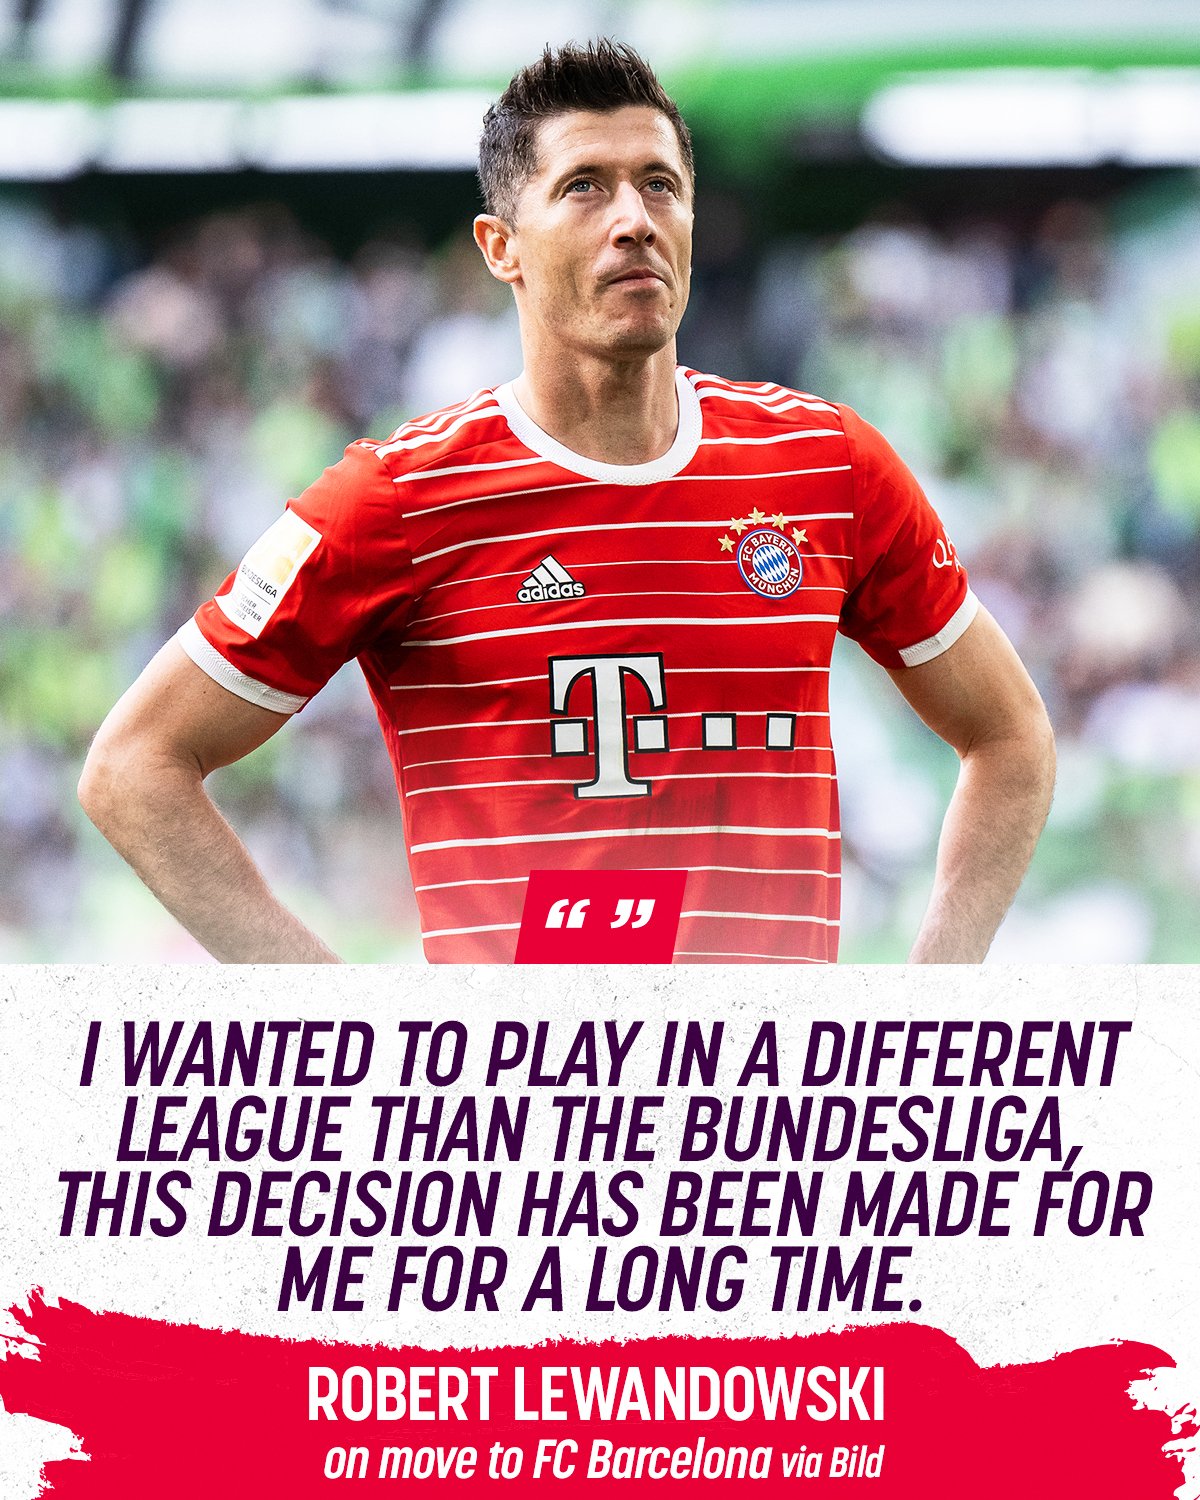 Nbc Sports Soccer With A Year Left On His Contact At Bayern Munich 33 Year Old Striker Robert Lewandowski Got His Move To Barcelona And He Had This To Say Fcb T Co Esfiqjibed